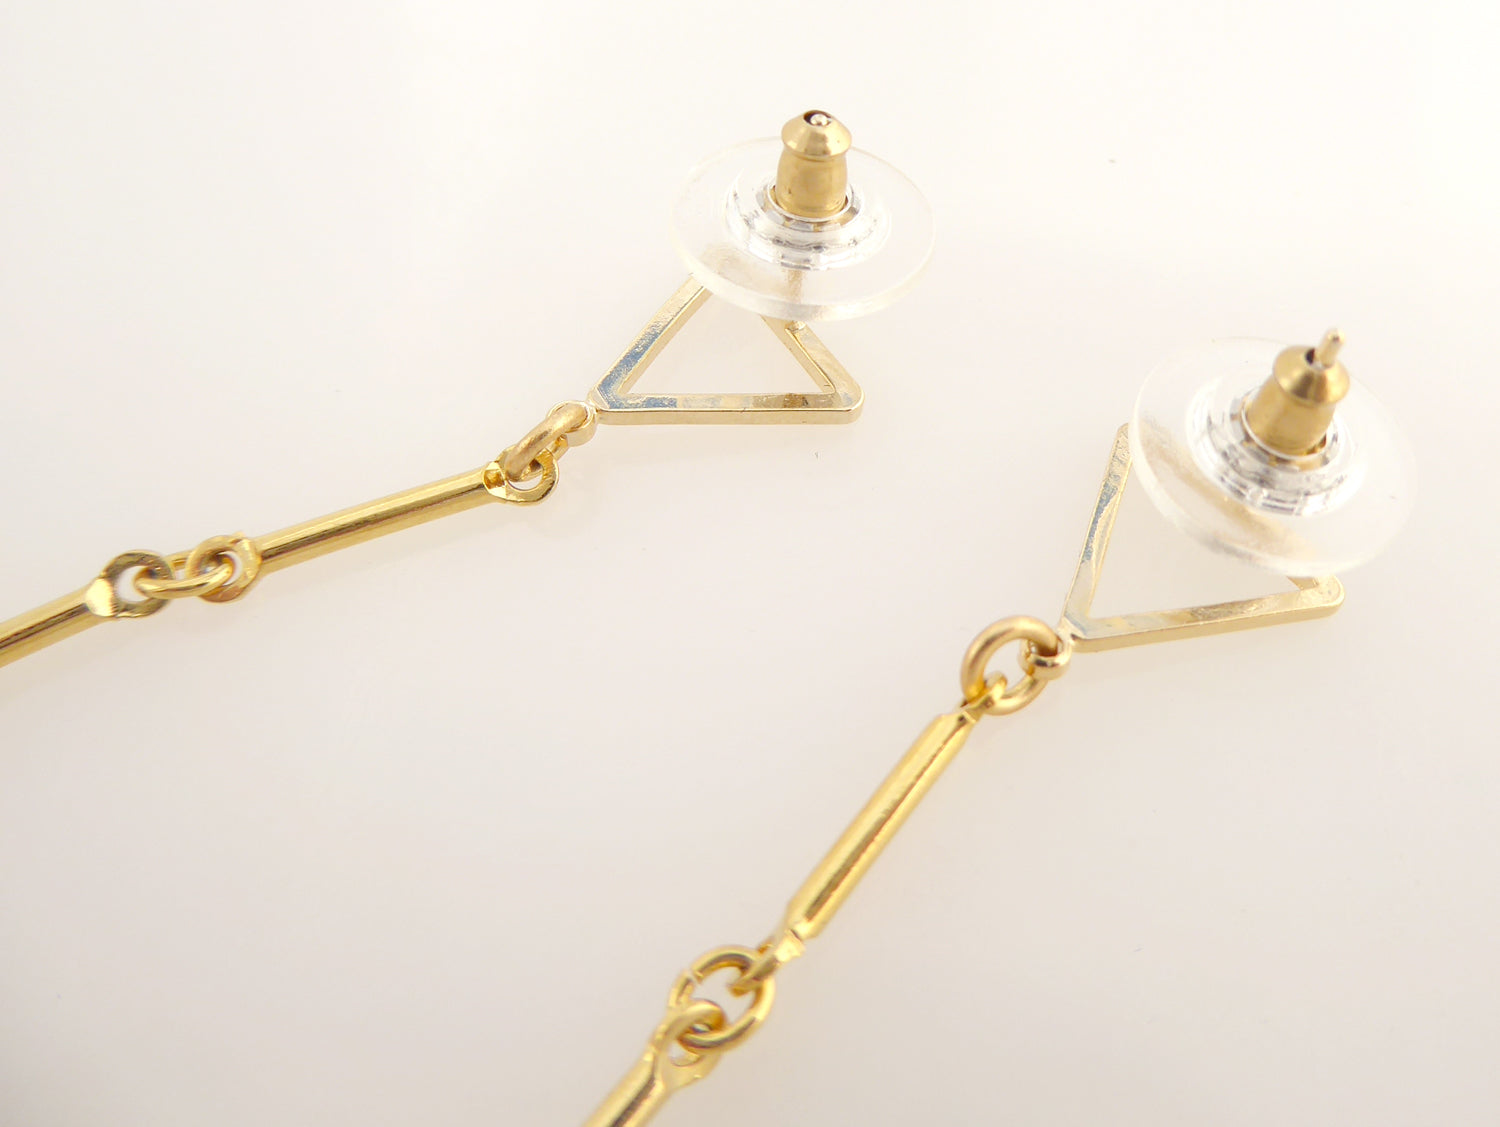 Gold triangle and white shell earrings